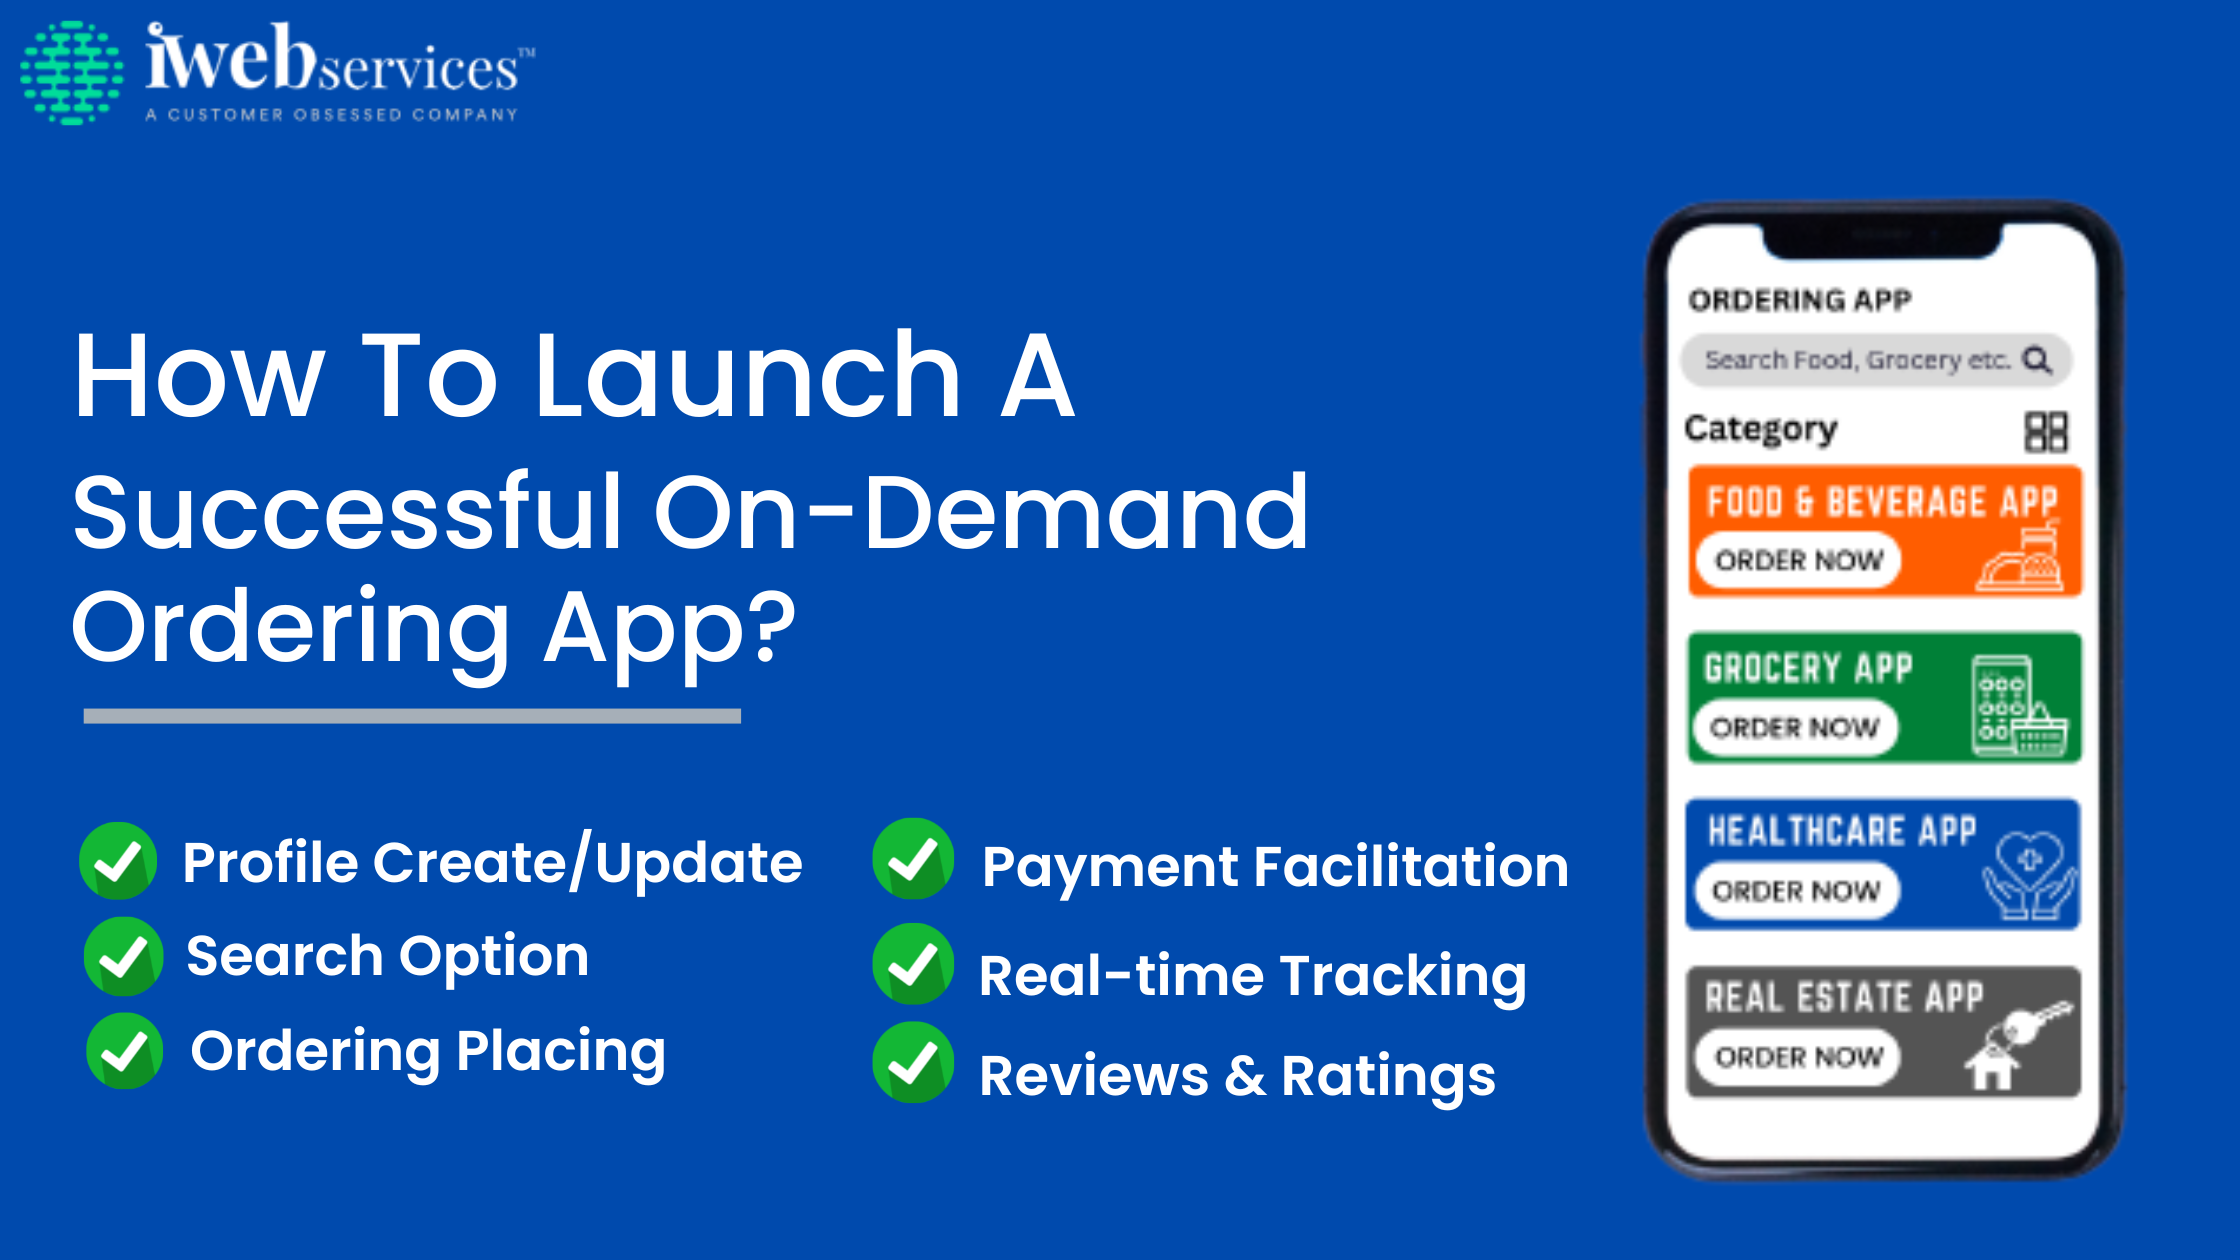 How To Launch A Successful On-Demand Ordering App?